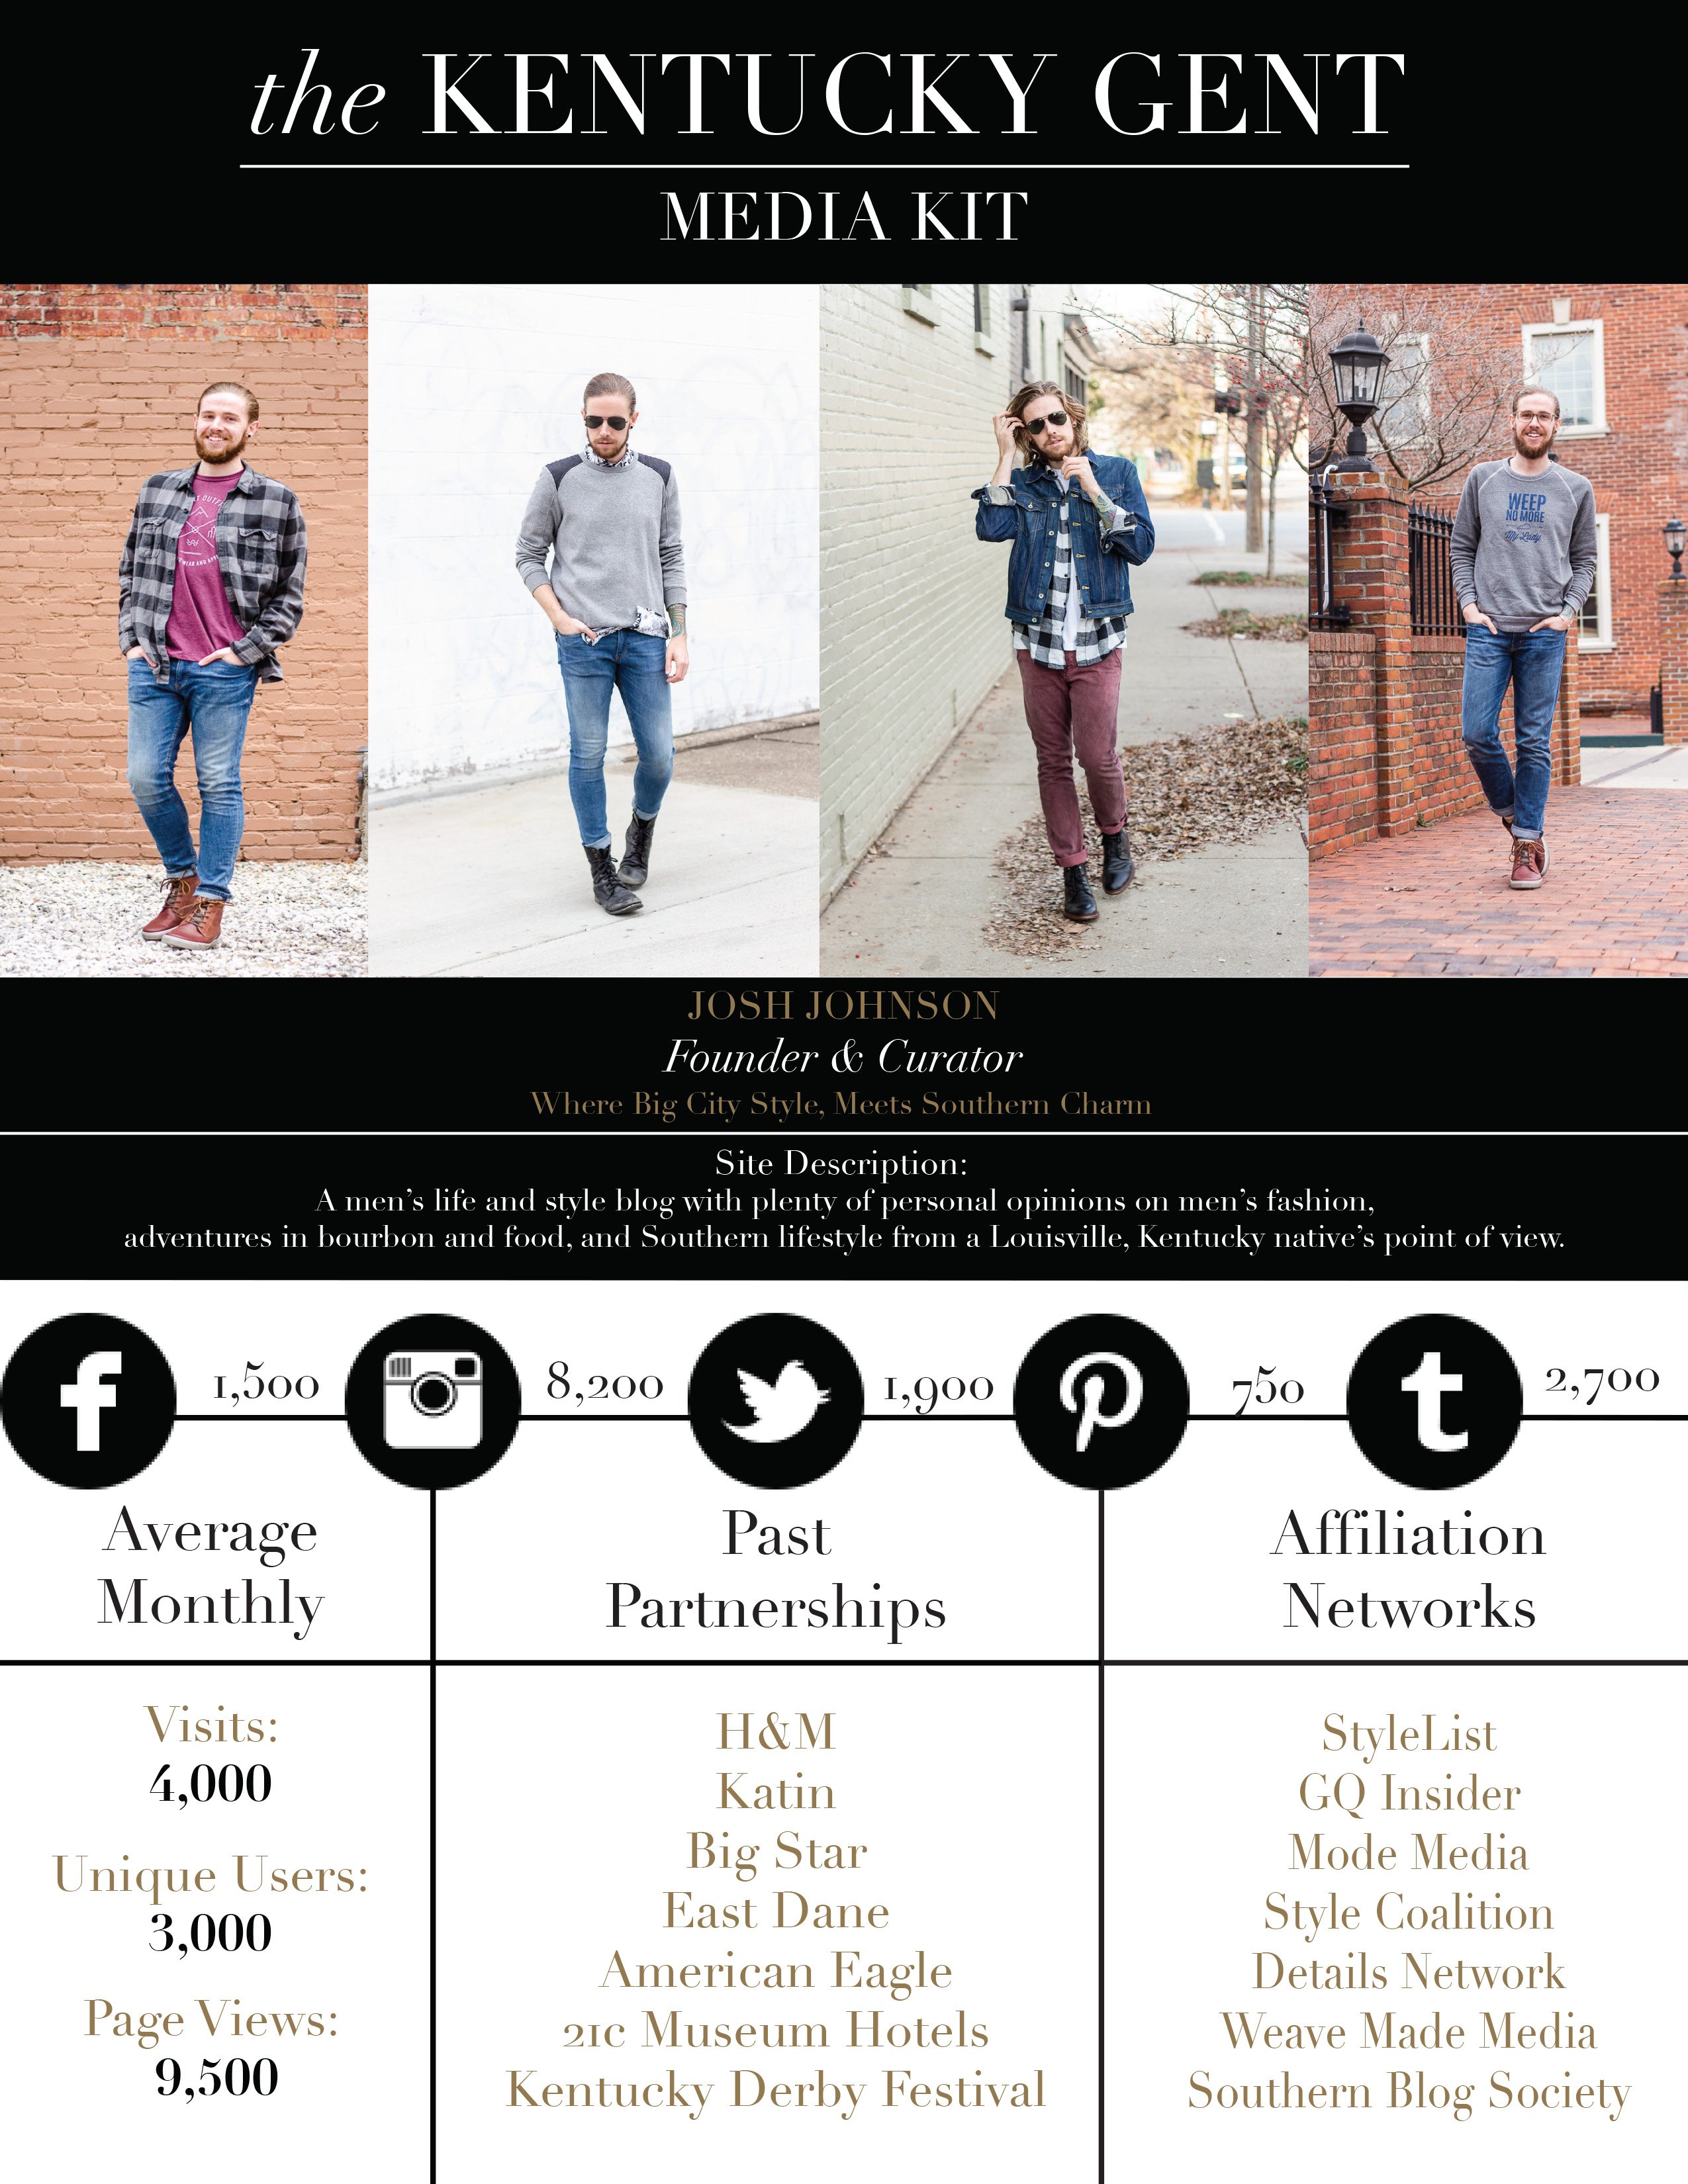 The Kentucky Gent, a men's fashion and lifestyle blogger, shares how to make a blogger media kit.